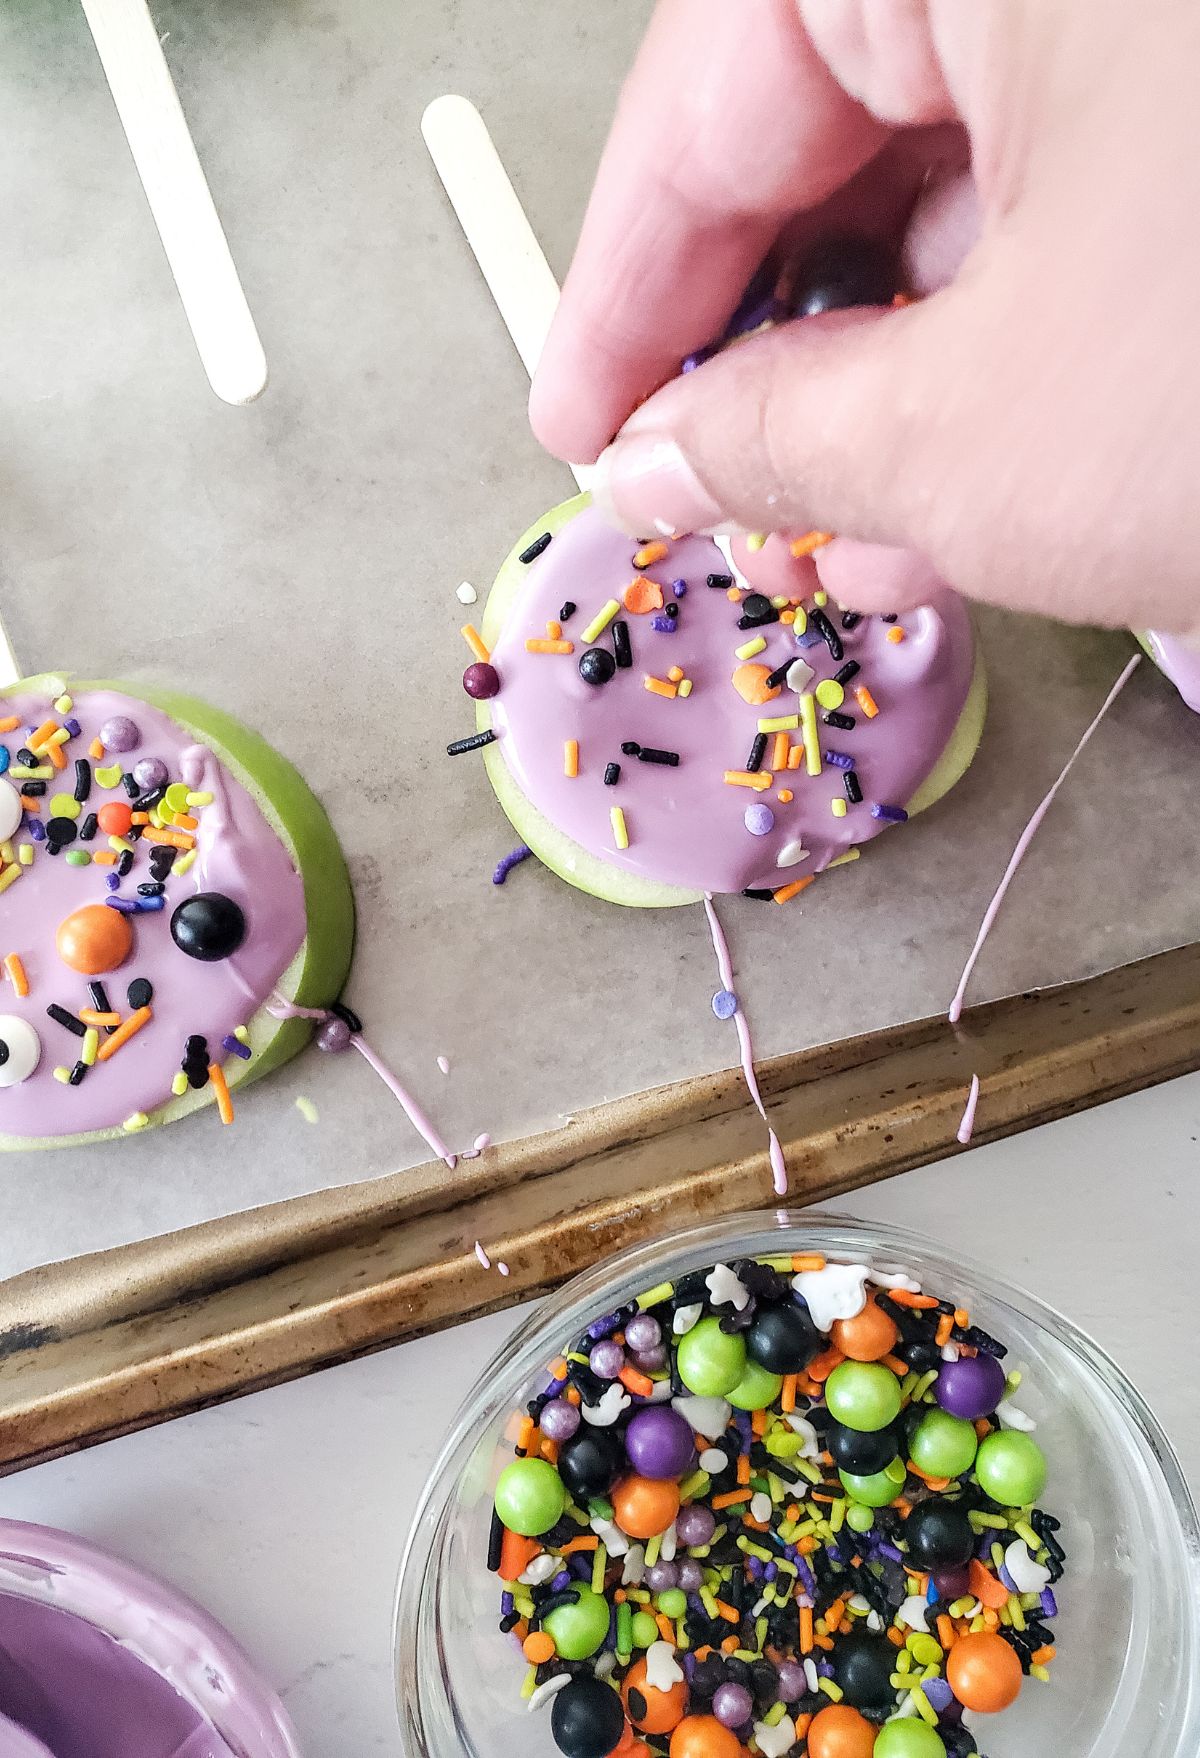 A person is putting sprinkles on a cake pop.